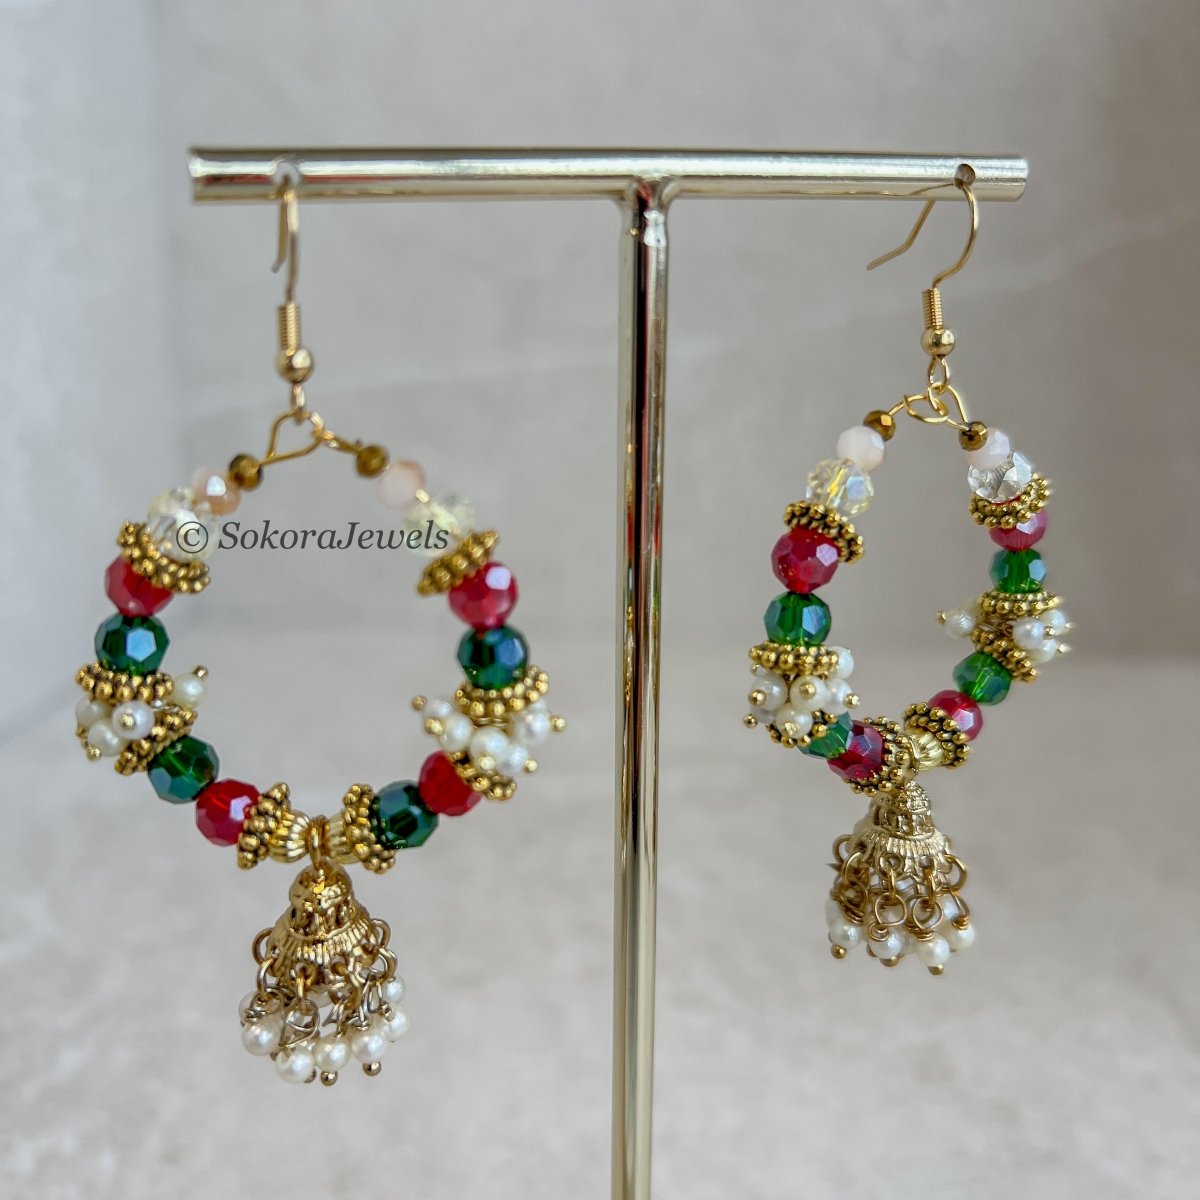 Red and Green Hoops - SOKORA JEWELSRed and Green Hoops